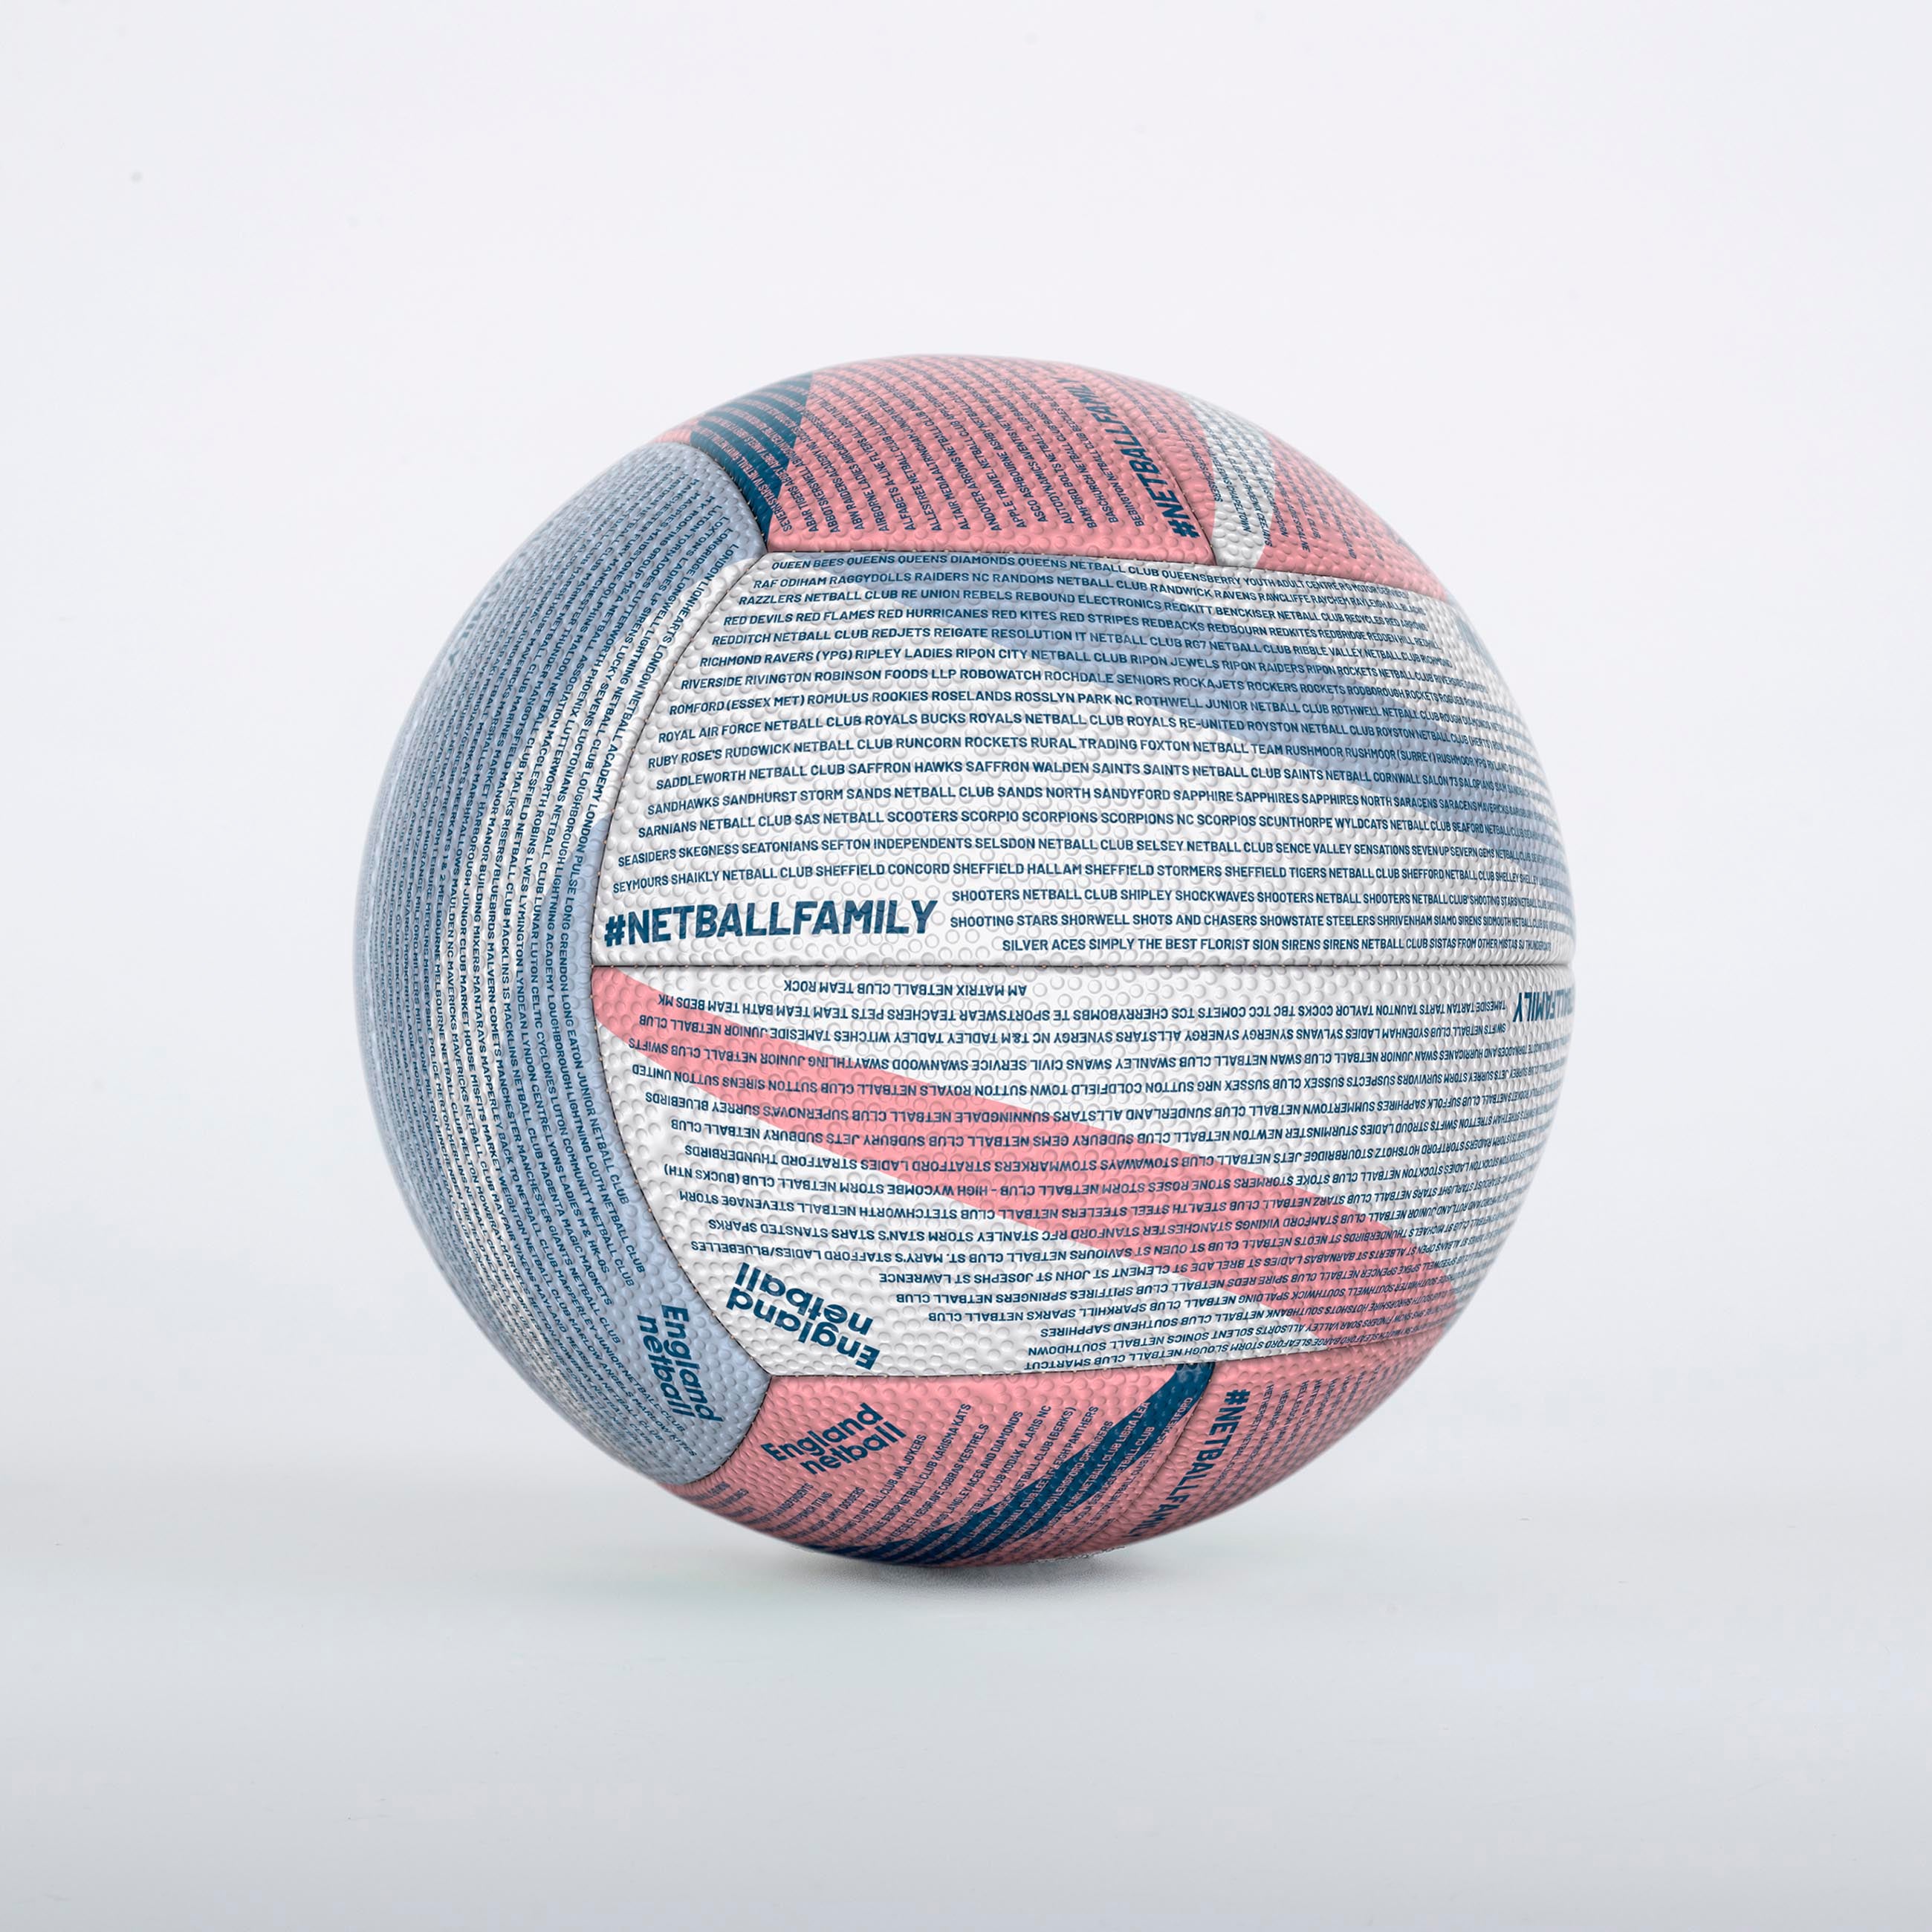 Limited Edition Netball Family Ball